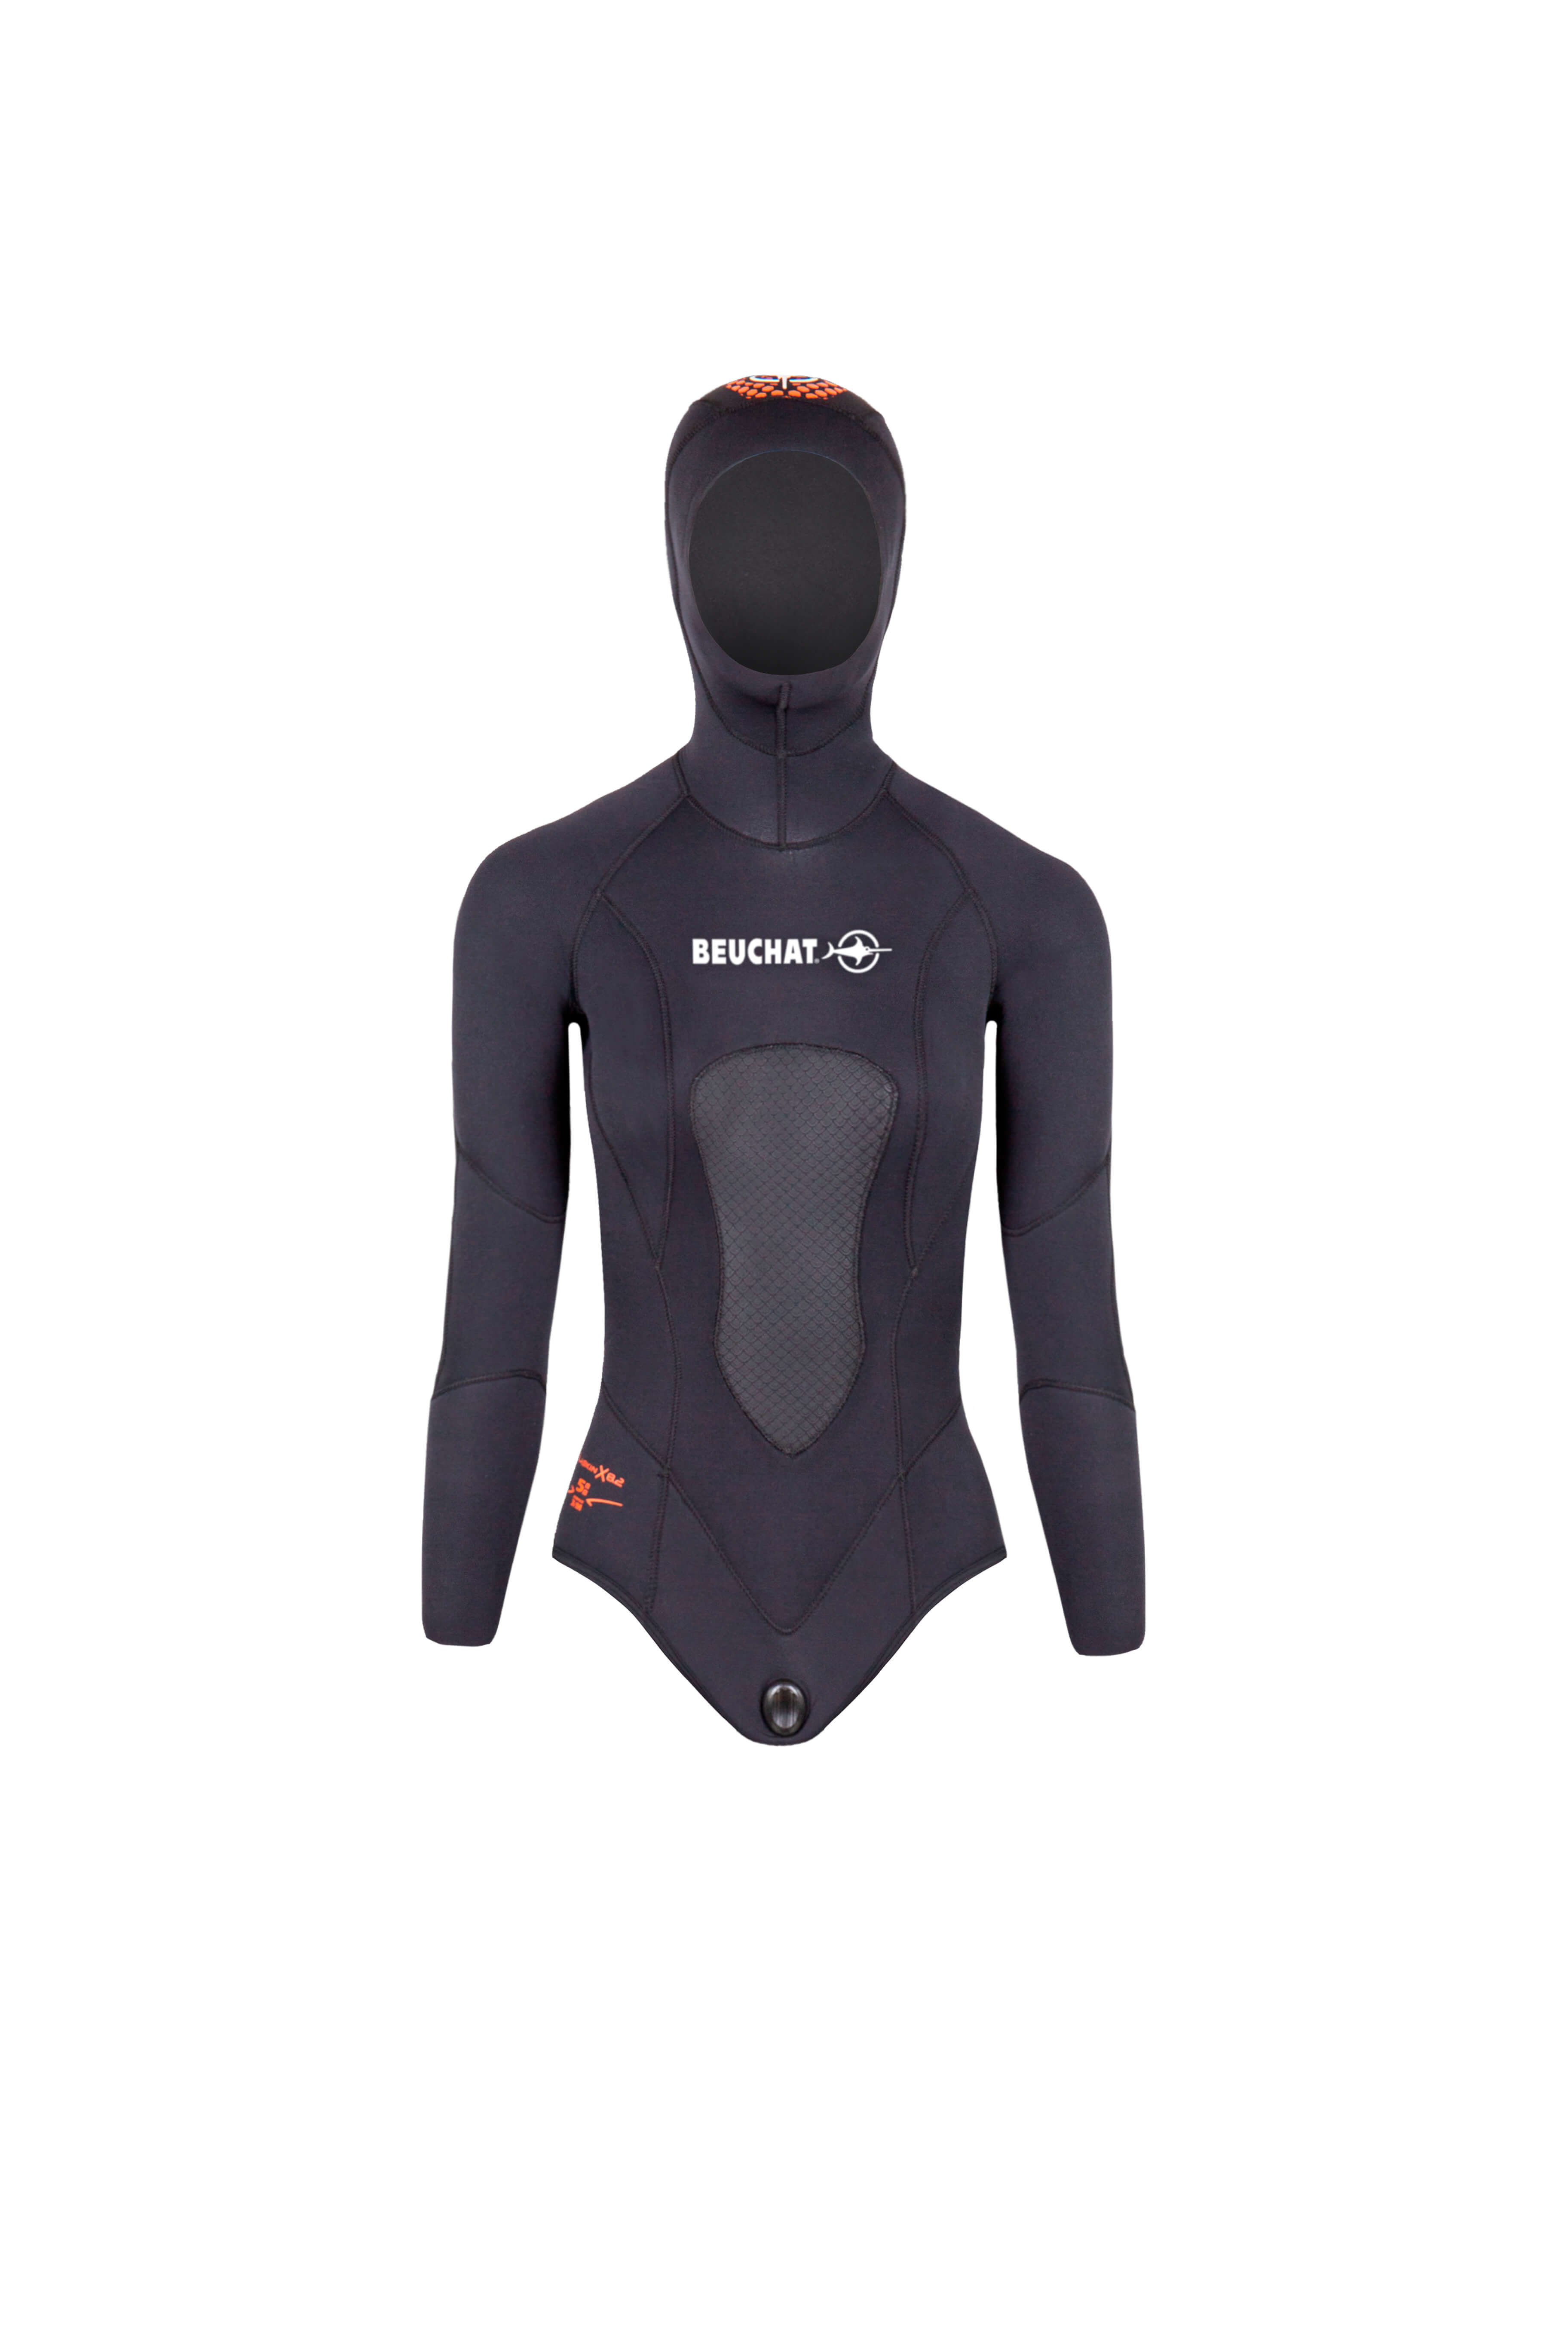 Beuchat Athena 5mm Opencell Jacket – Female